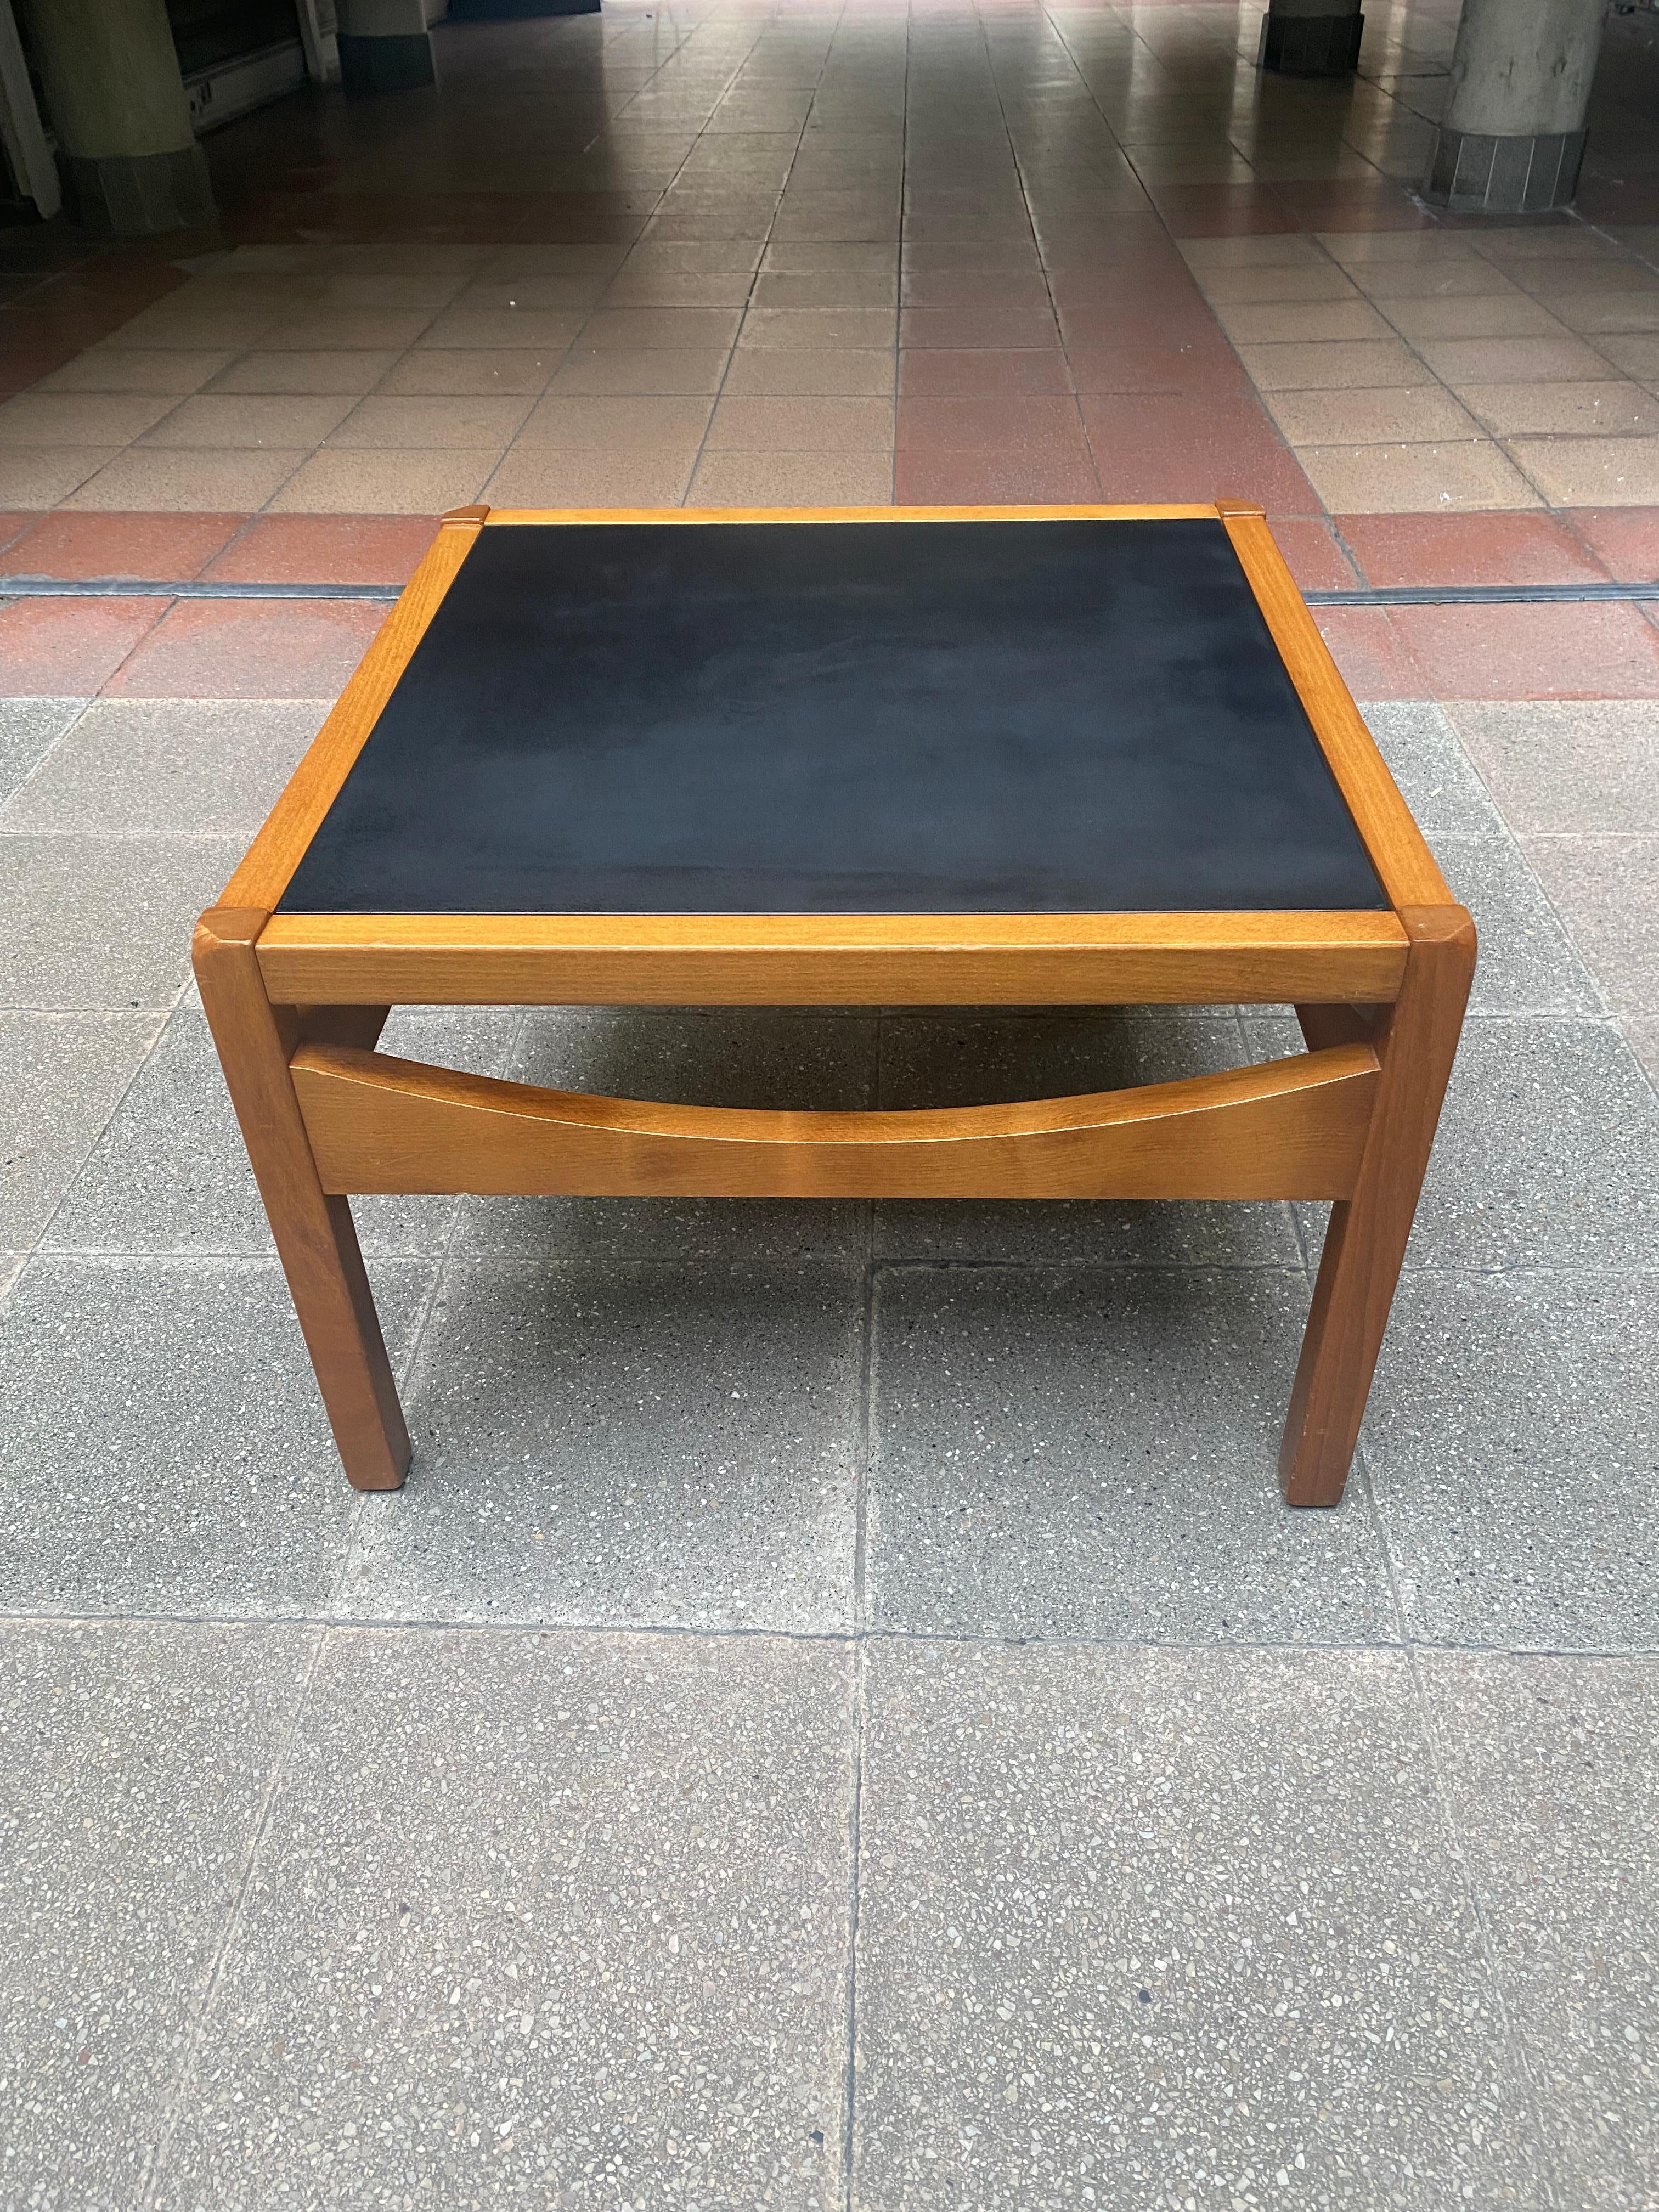 Bernard Vuarnesson-
reverso coffee table black / white - circa 1978.
Iroko and black / white reversible melamine.
Measures: 60 x 60 x 40.
In perfect condition.

Bernard Vuarnesson is an engineer graduated from the Ecole Supérieure du Bois and